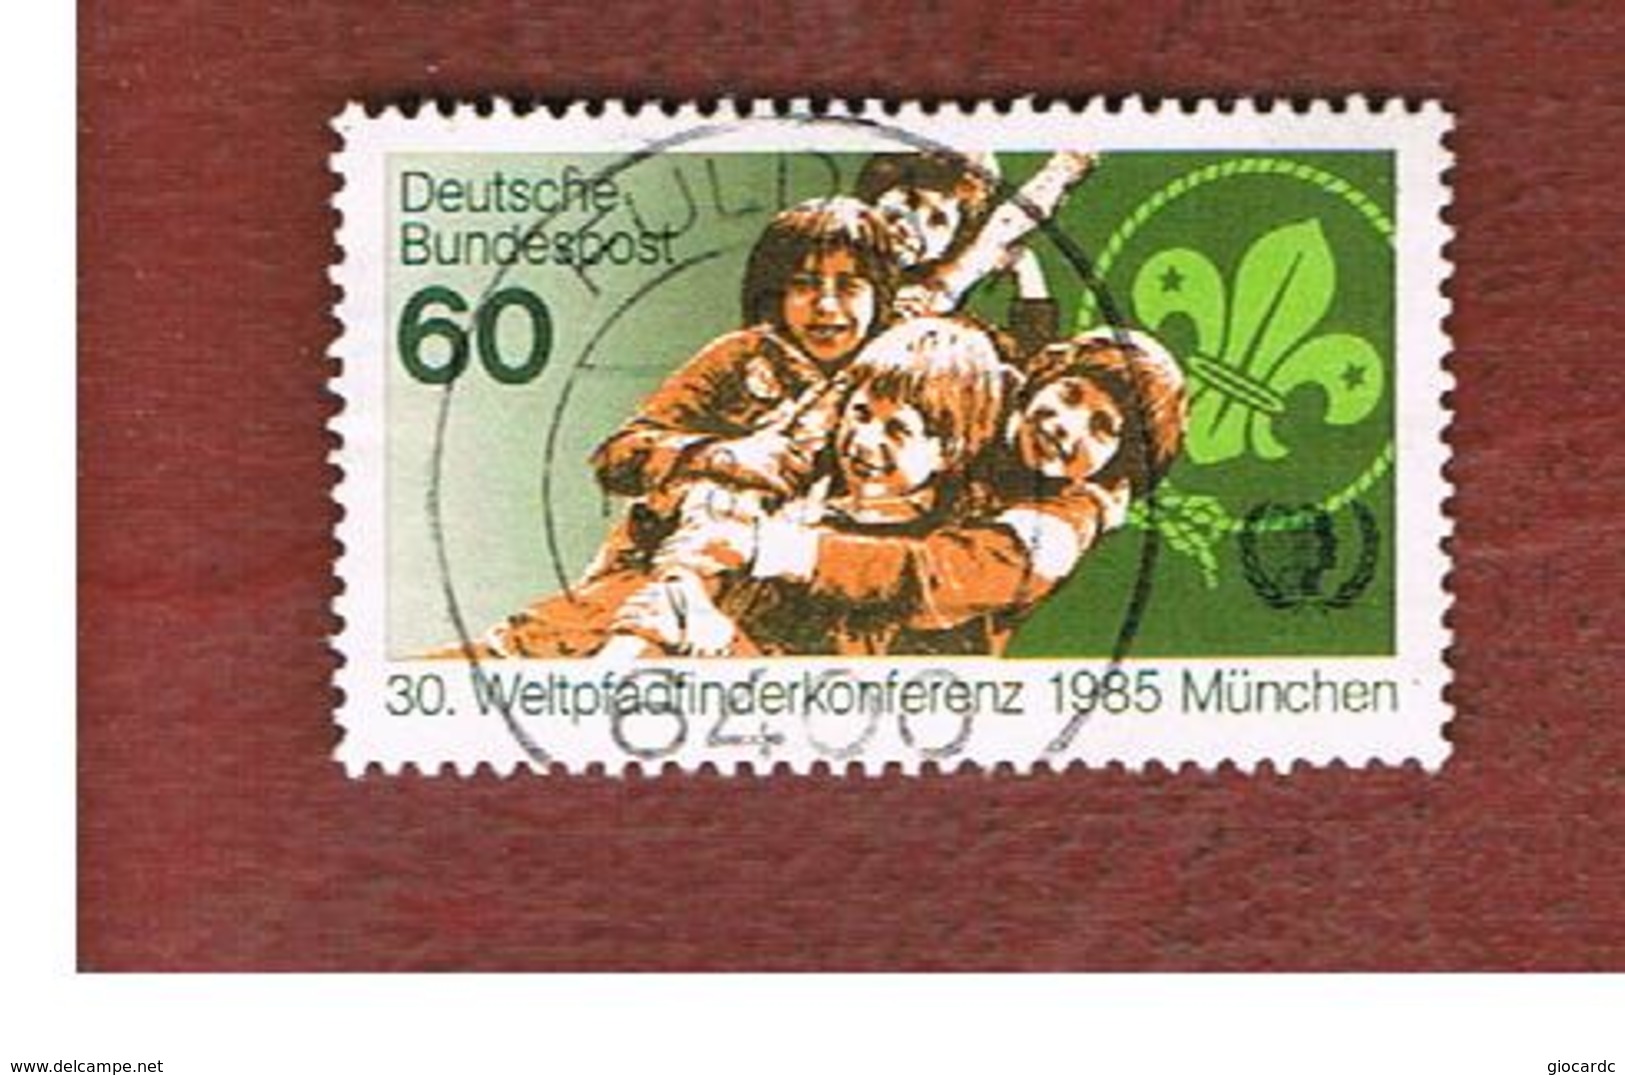 GERMANIA (GERMANY) - SG 2102 - 1985 WORLD SCOUTS CONFERENCE  -   USED - Usati